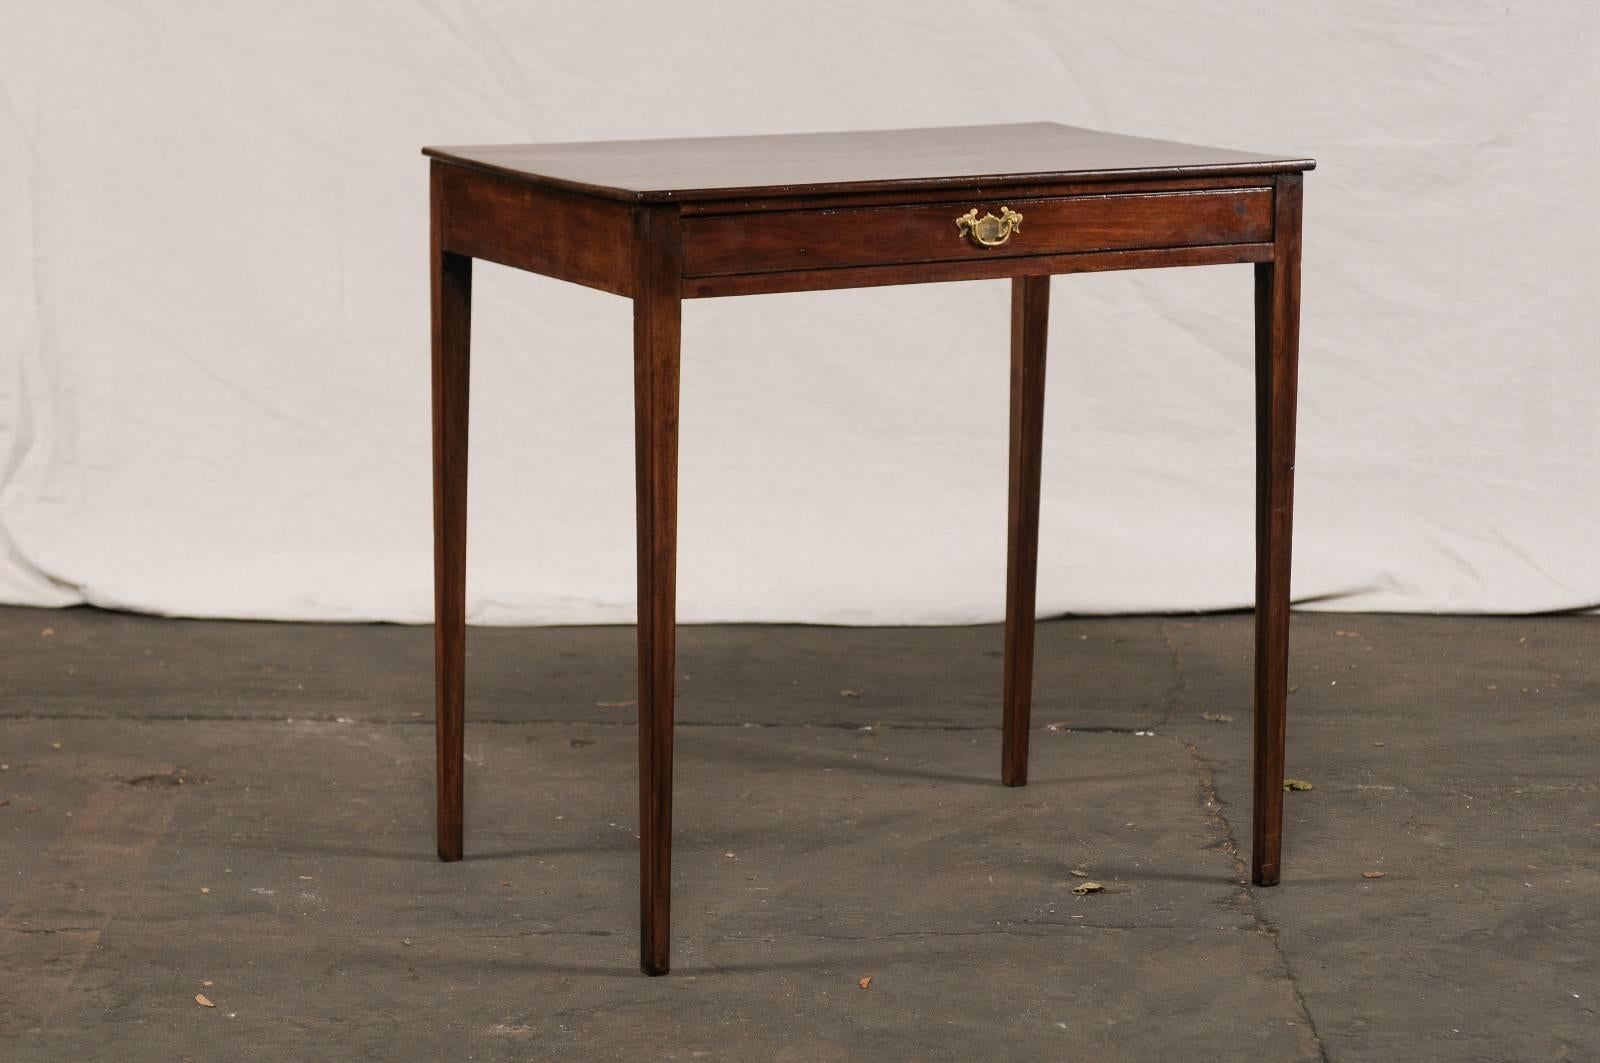 English Regency one drawer mahogany writing side table, excellent proportions, circa 1780-1820.